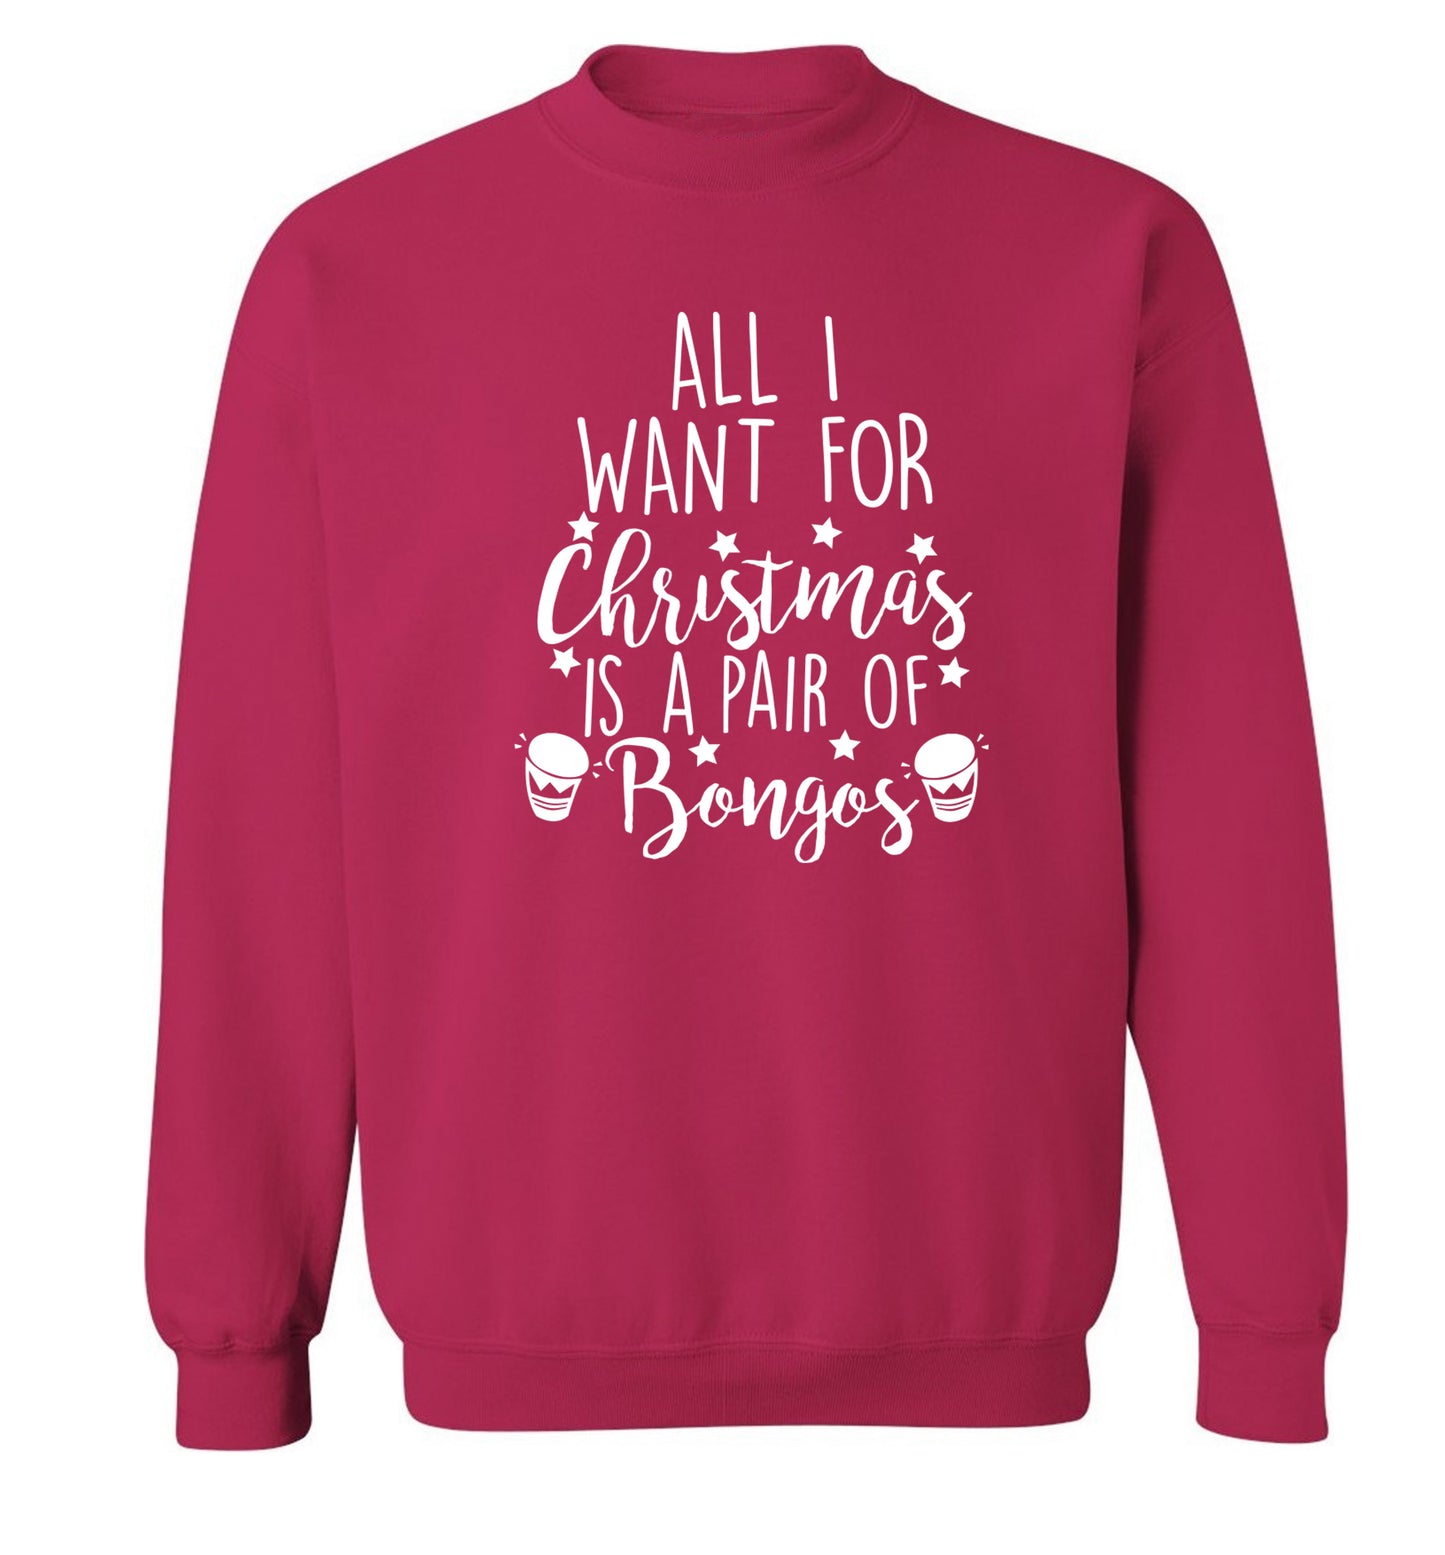 All I want for Christmas is a pair of bongos! Adult's unisex pink Sweater 2XL